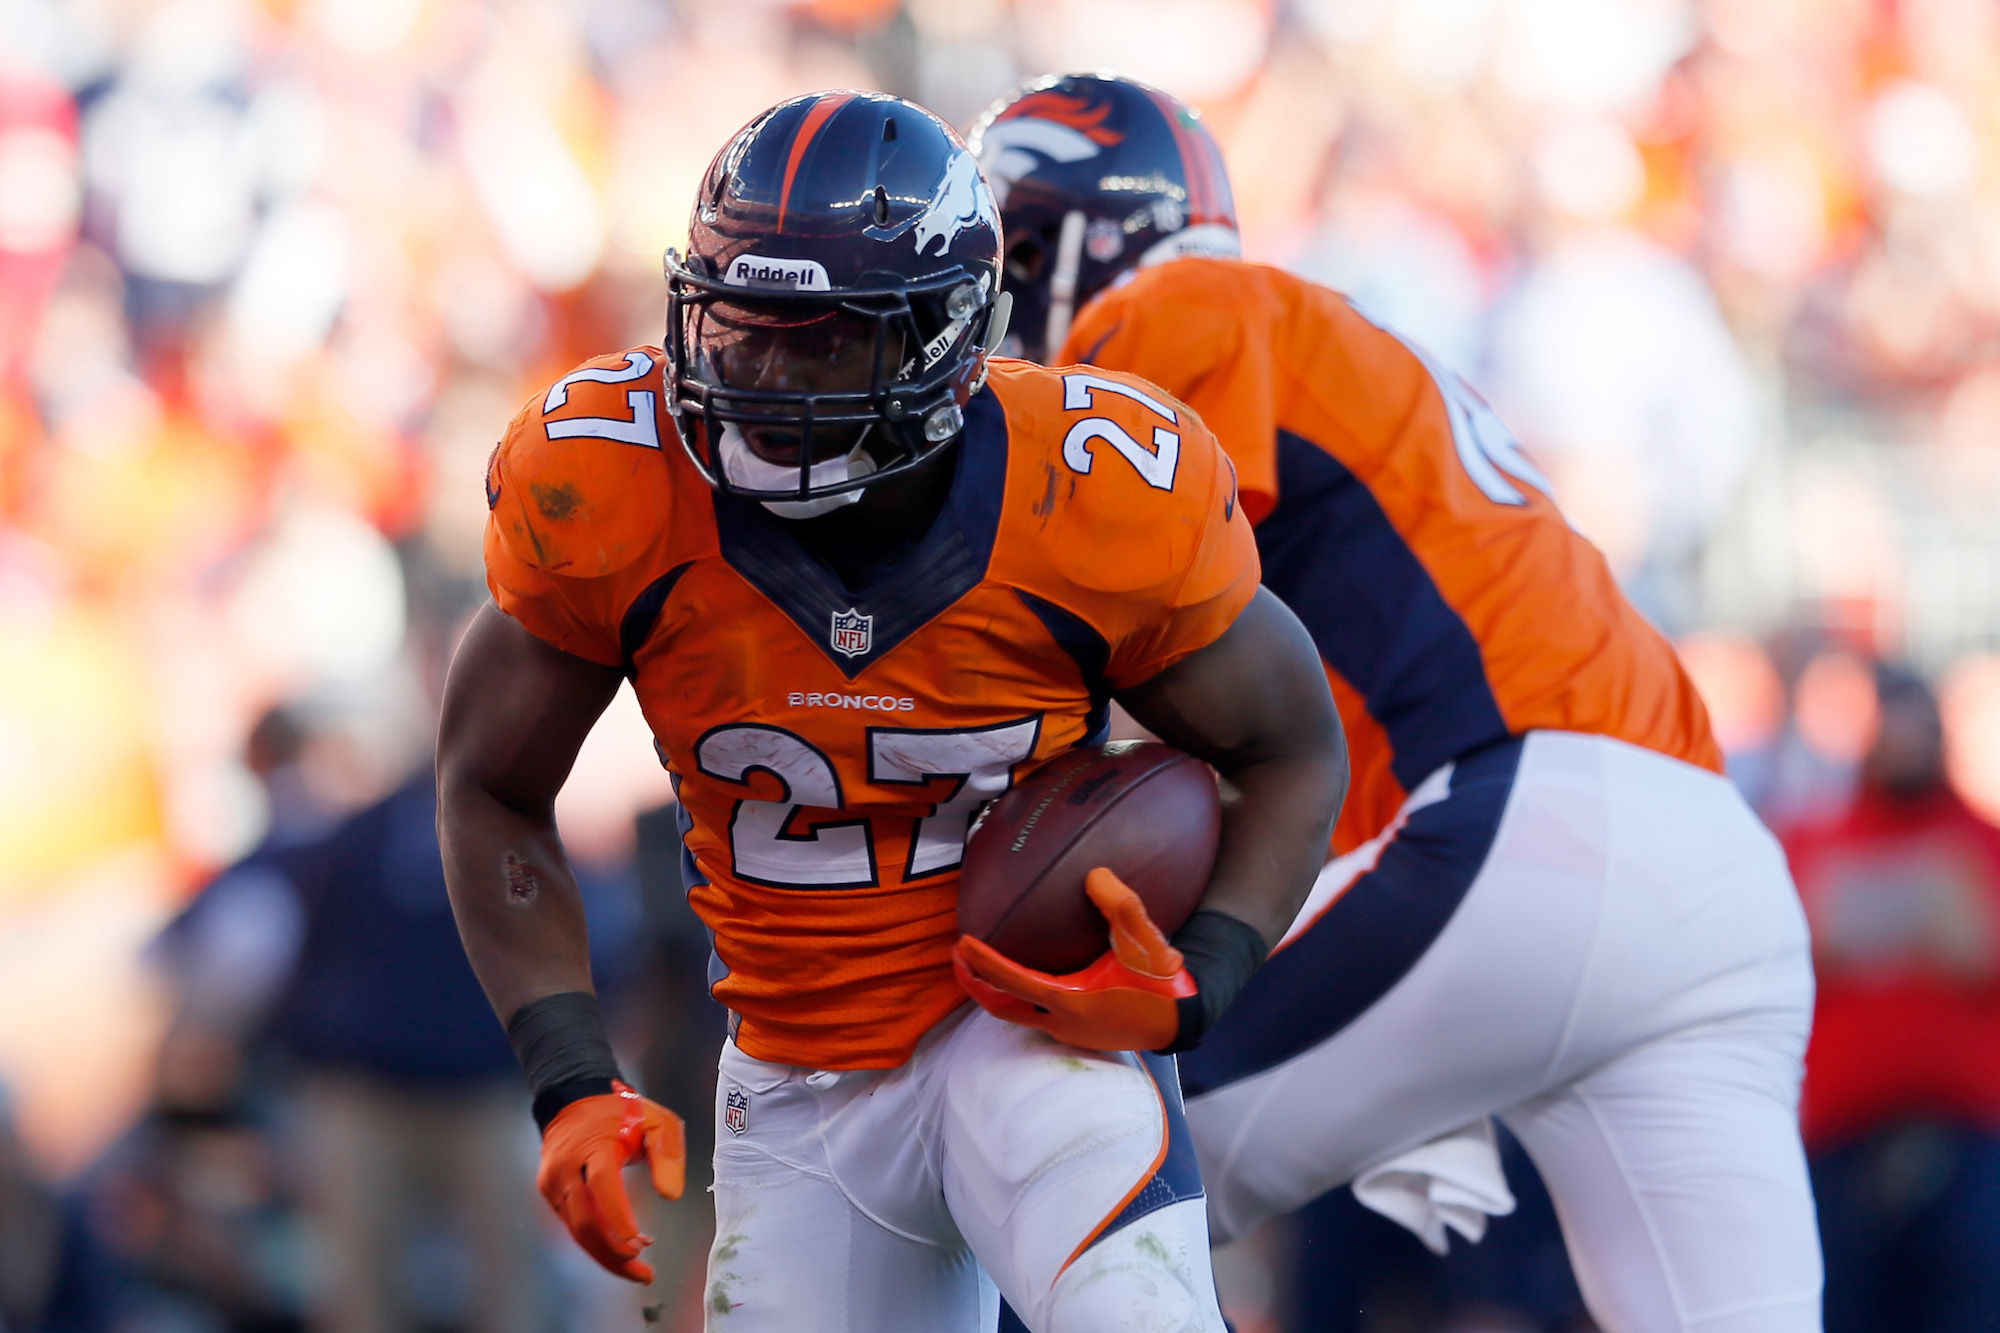 While Knowshon Moreno never turned into a star, he made more than $20 million in the NFL.